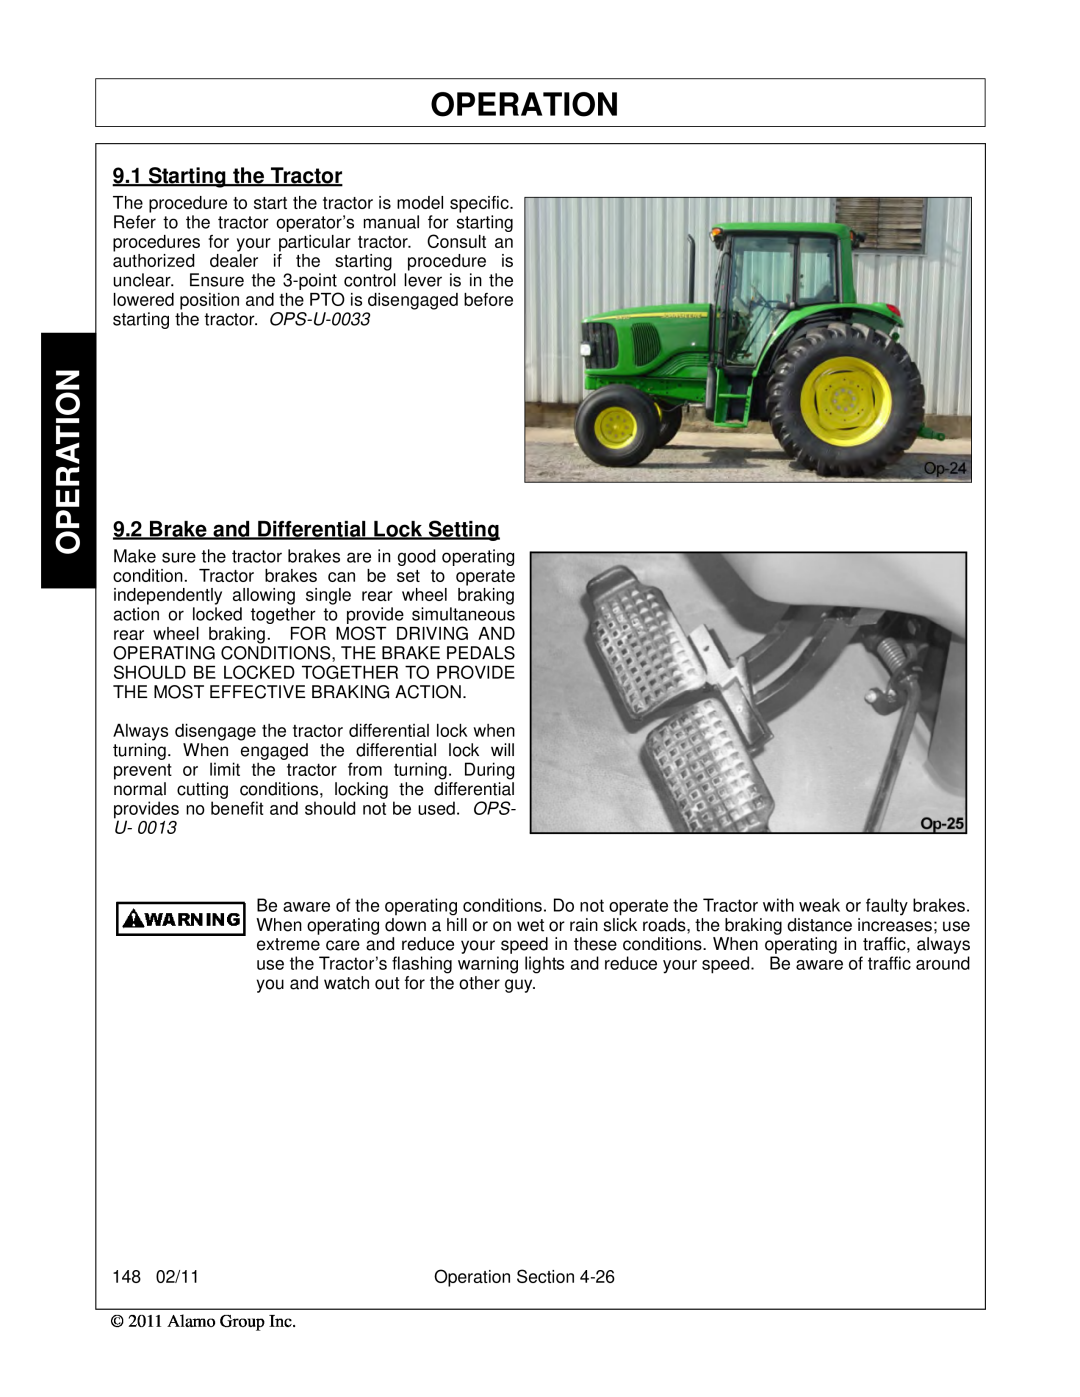 Rhino Mounts 148 manual Operation, Starting the Tractor, Brake and Differential Lock Setting 